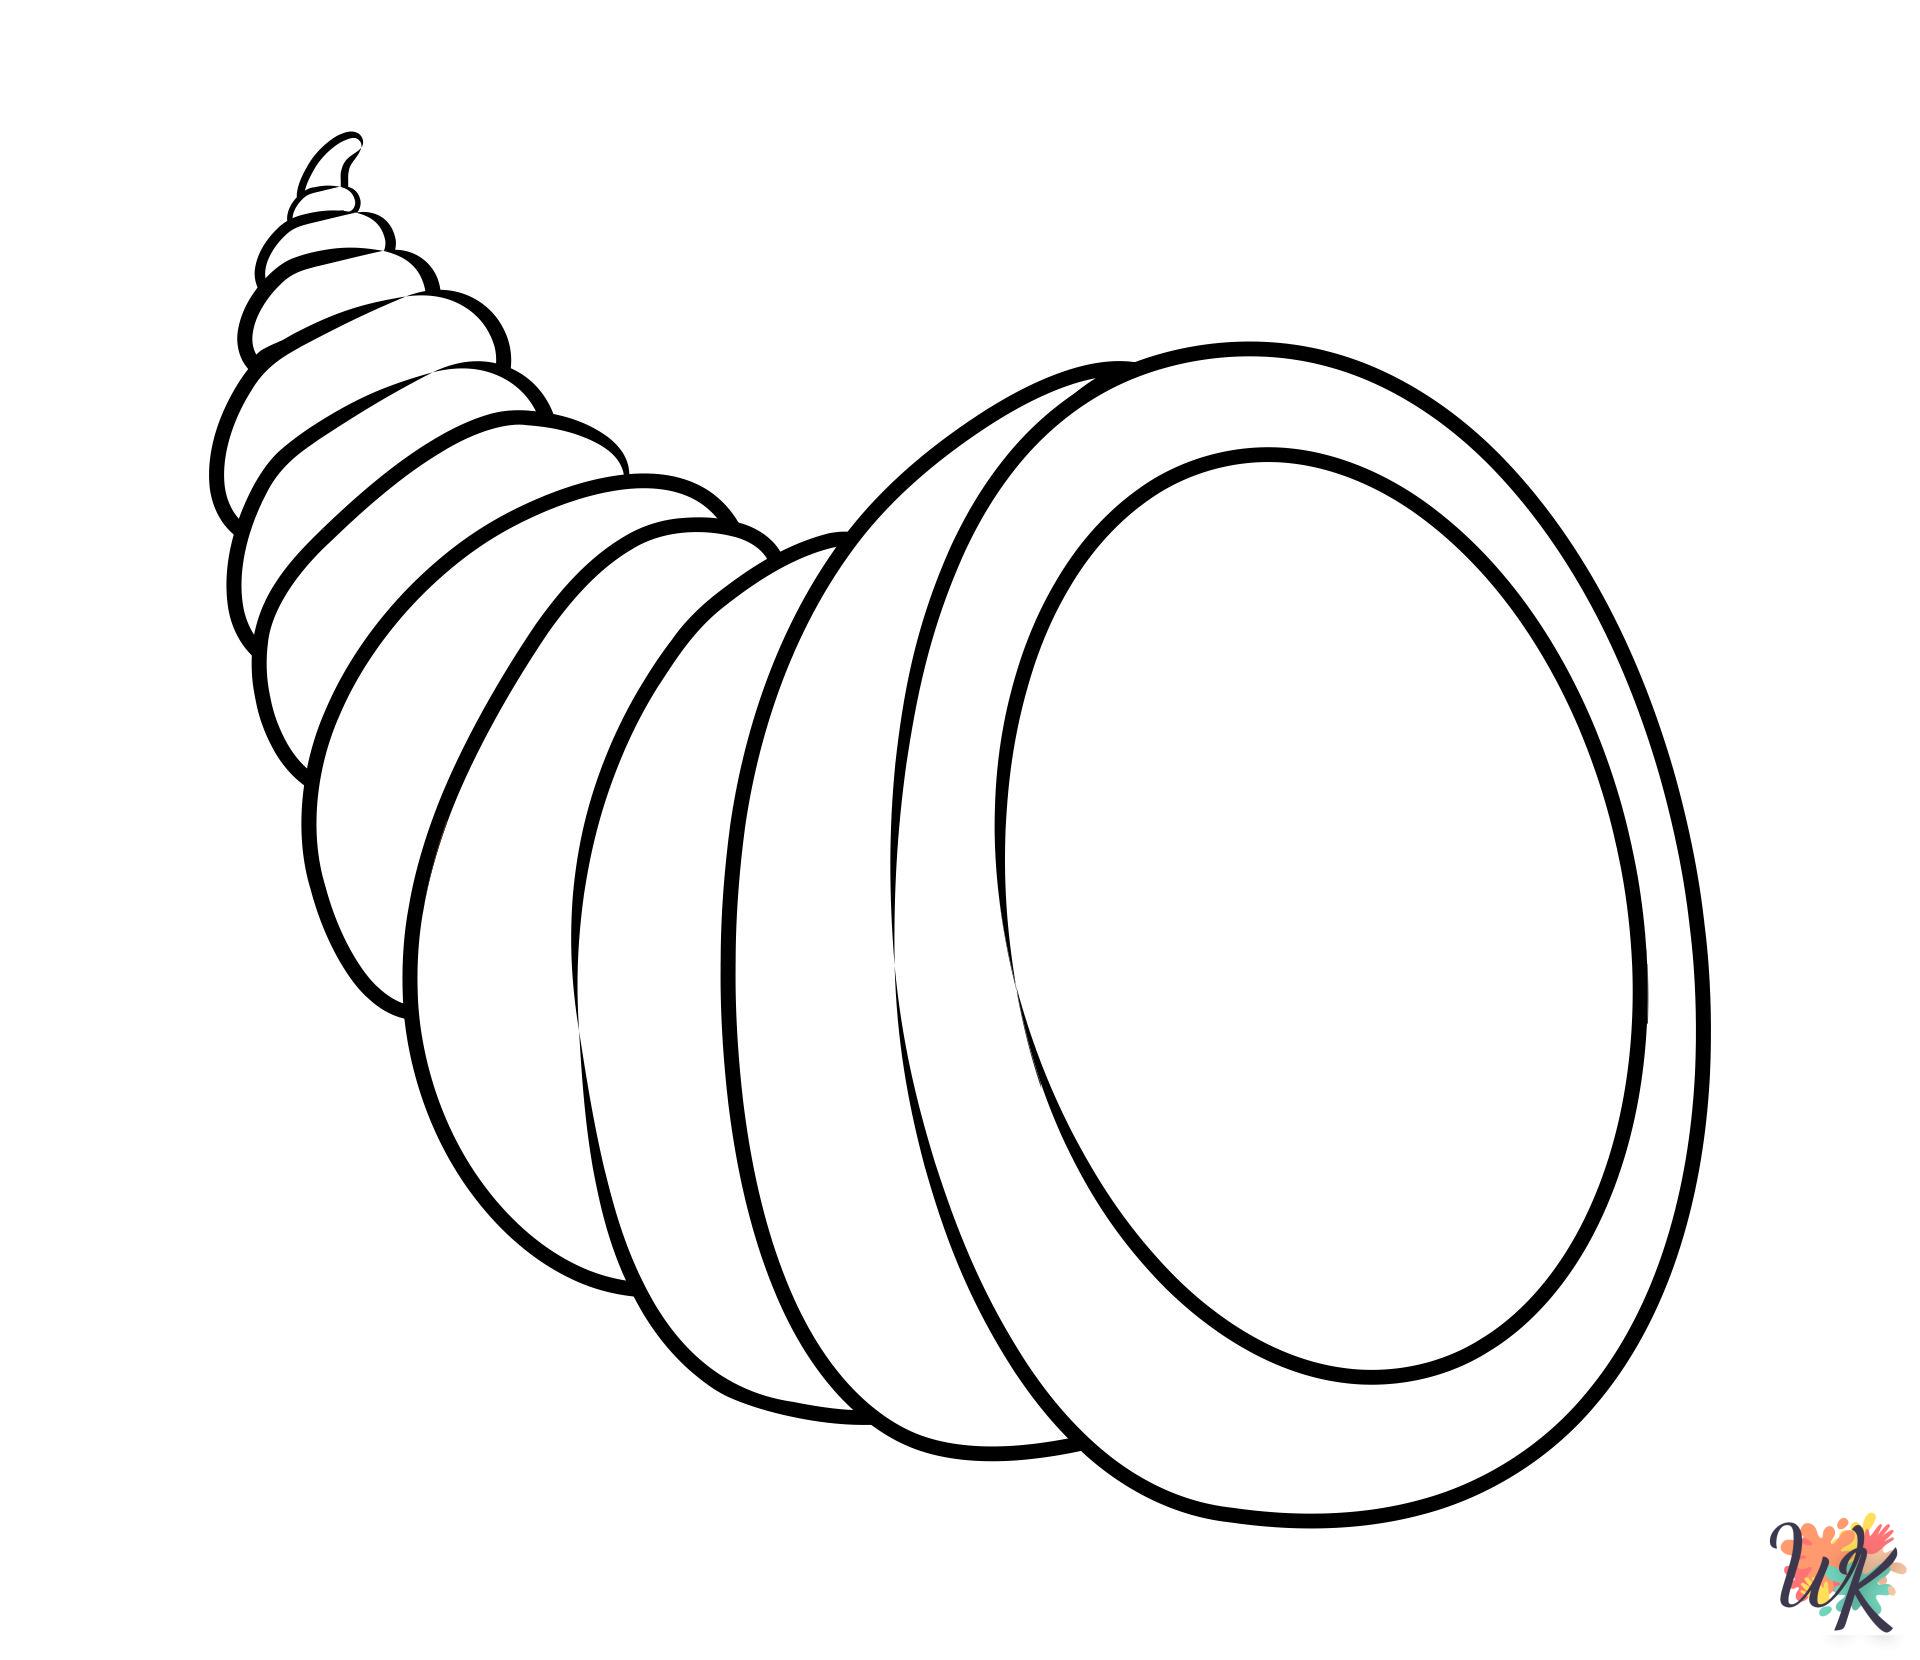 Cornucopia coloring pages for adults